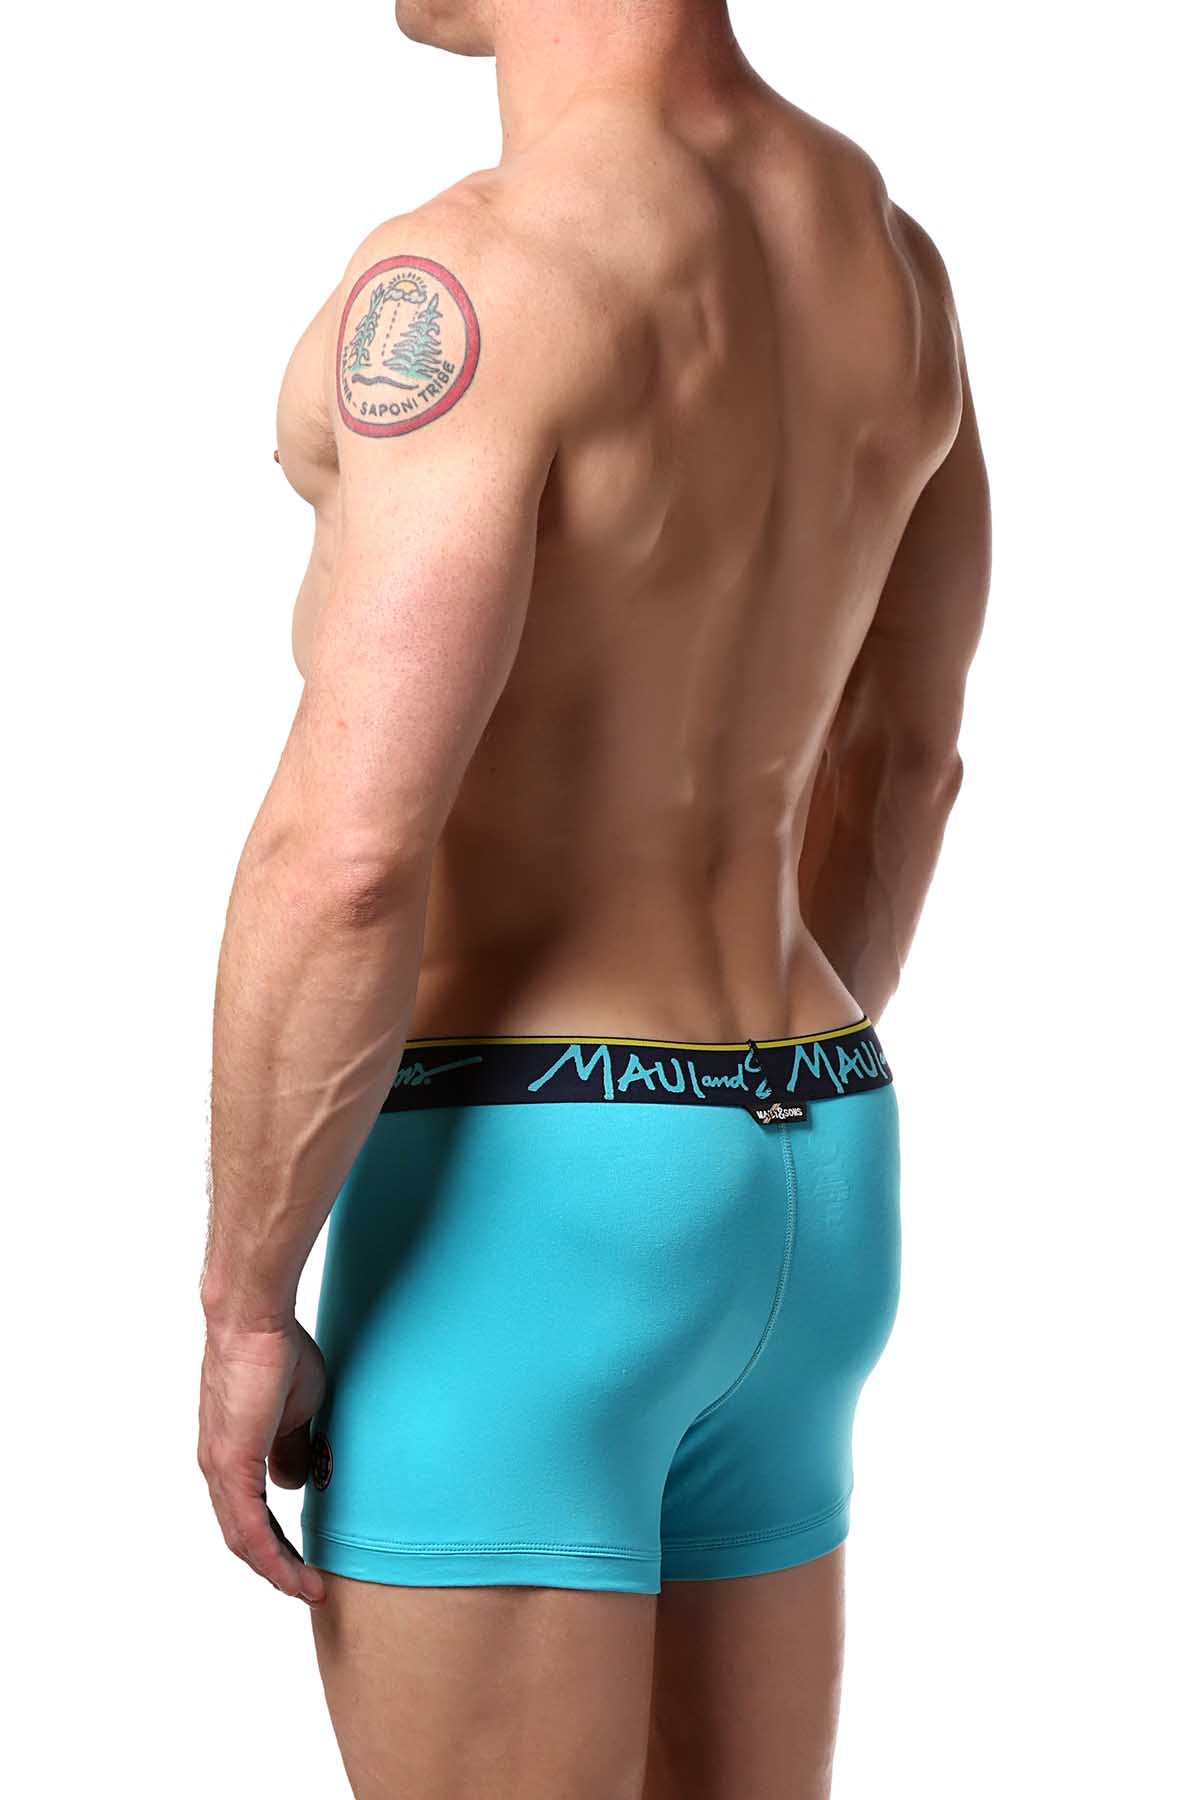 Maui and Sons Scuba-Blue/Pineapple Cotton-Stretch Trunk 2-Pack